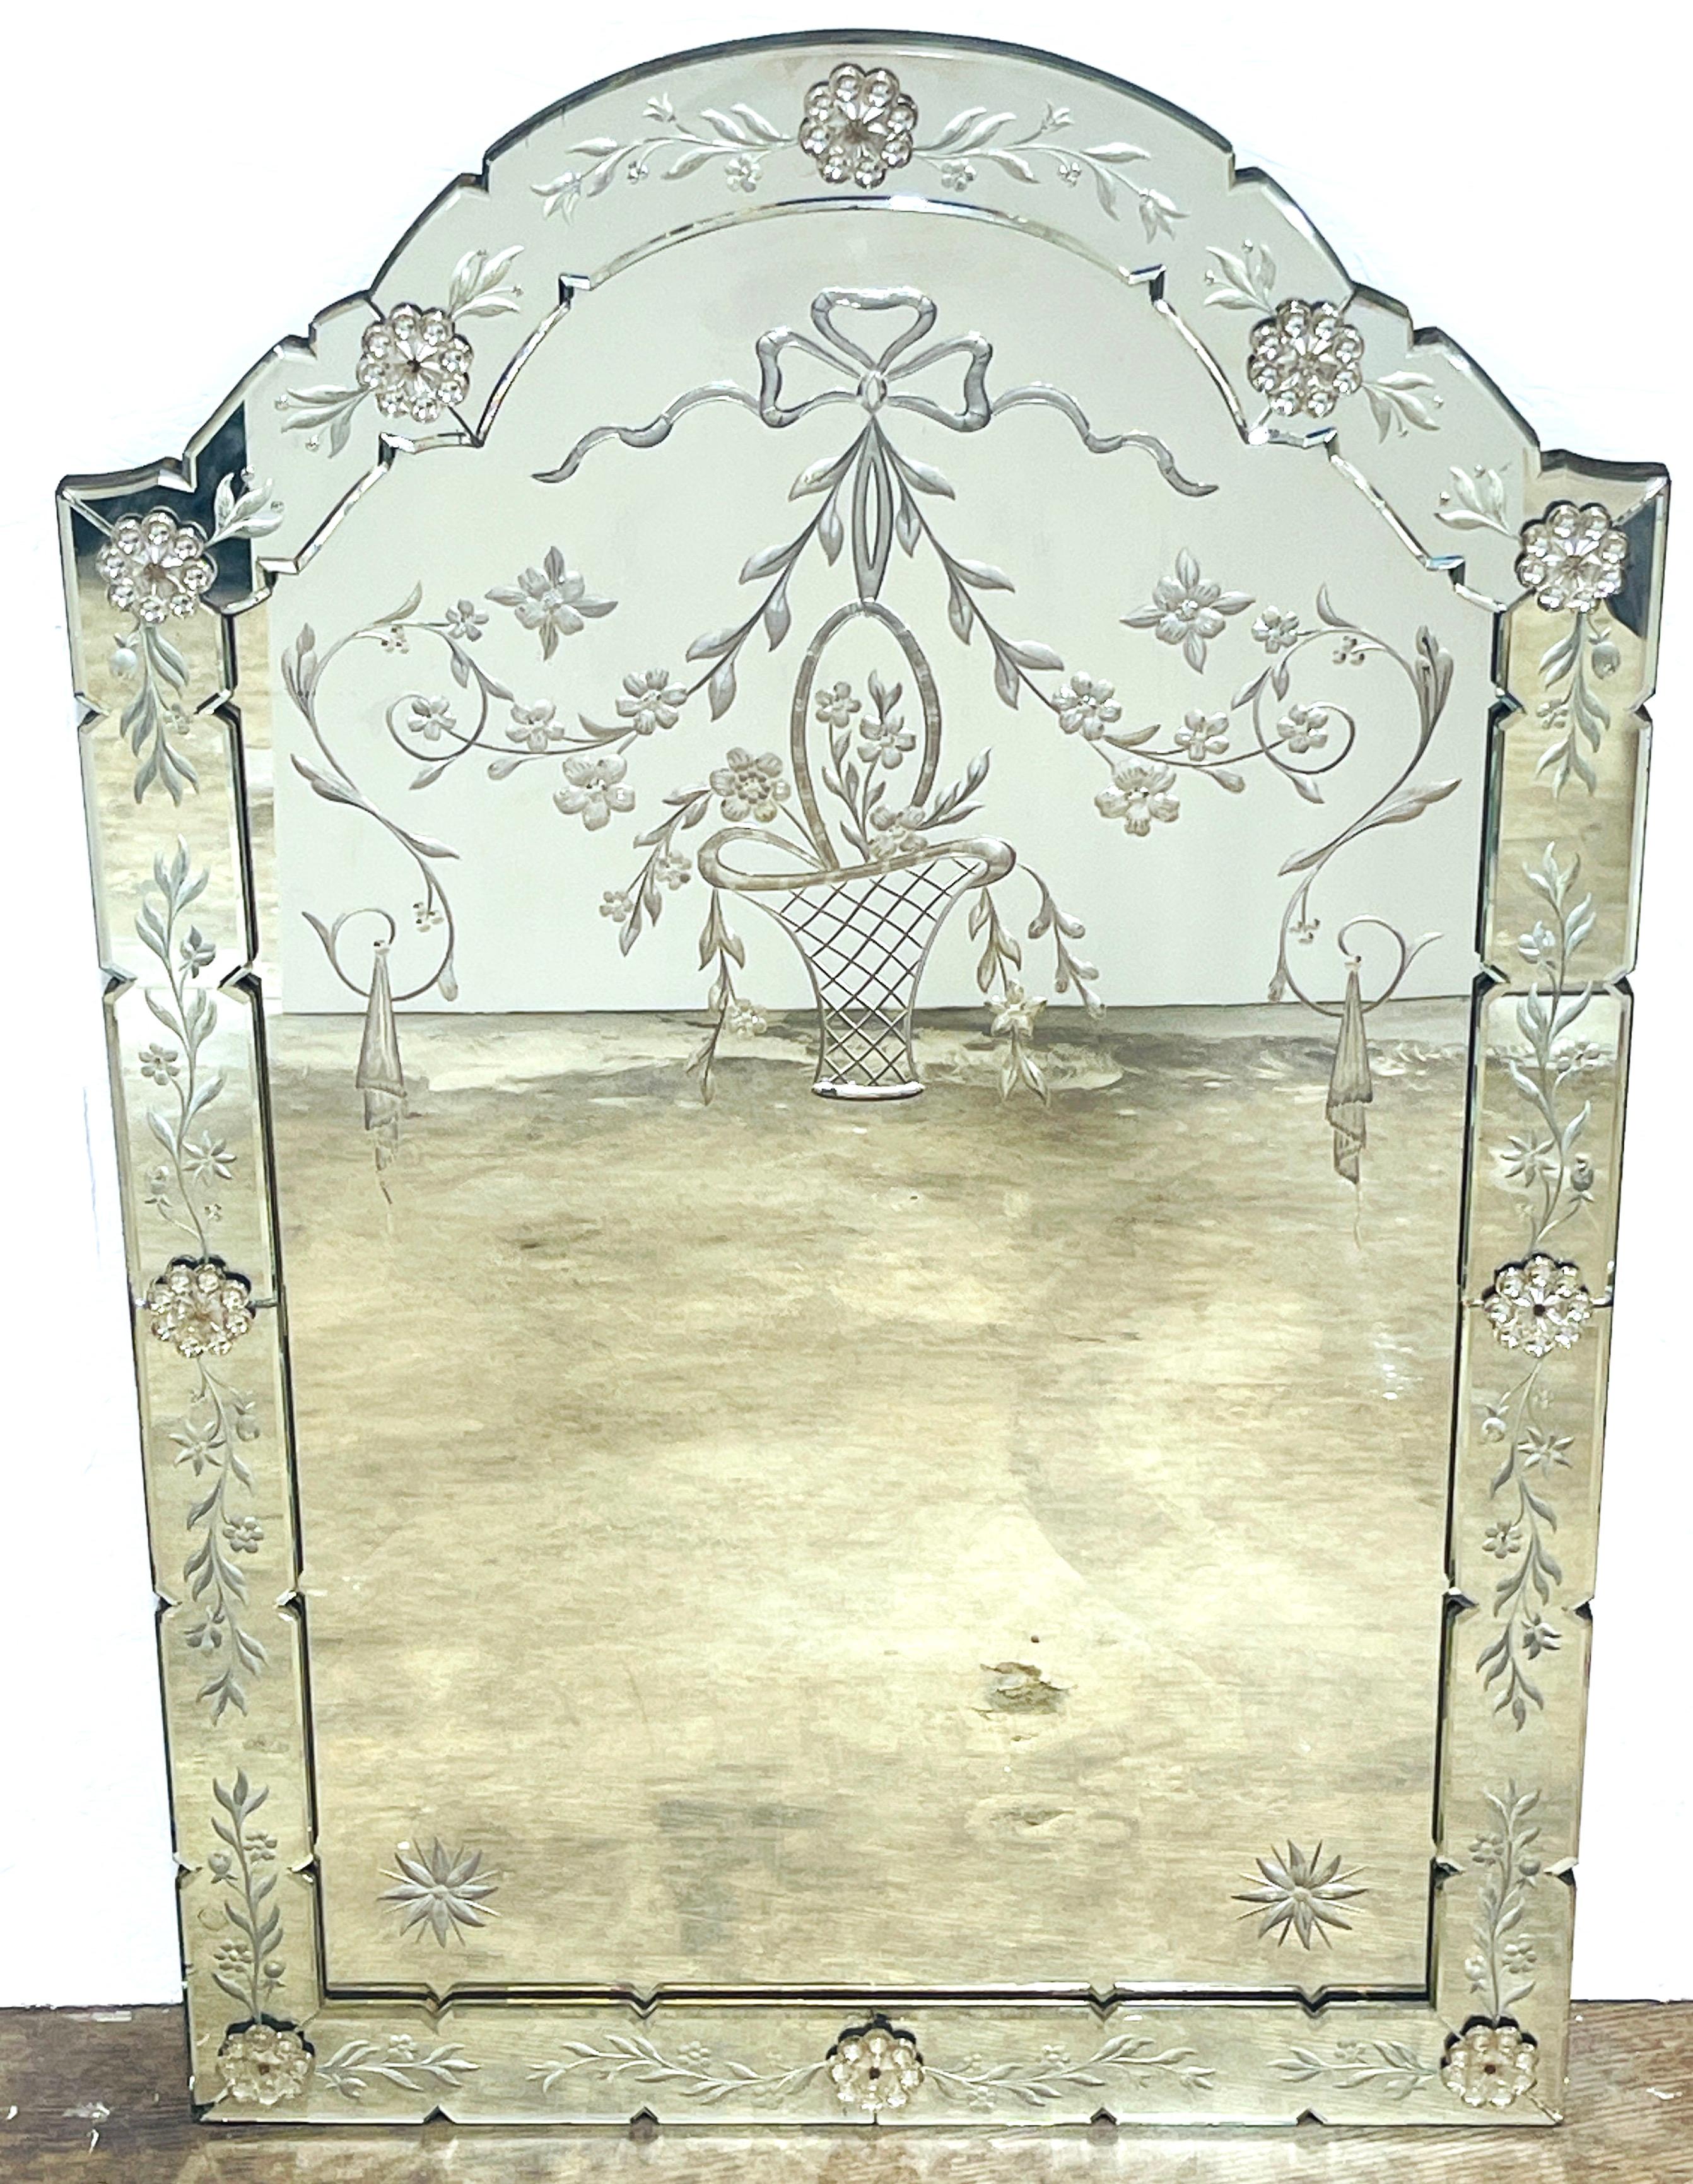 Stunning Venetian 'Rock Crystal' Engraved Neoclassical Mirror
Italy, circa 1920s 

The captivating allure of this stunning Venetian 'Rock Crystal' Engraved Neoclassical Mirror, a true testament to Italian craftsmanship from the 1920s. This exquisite